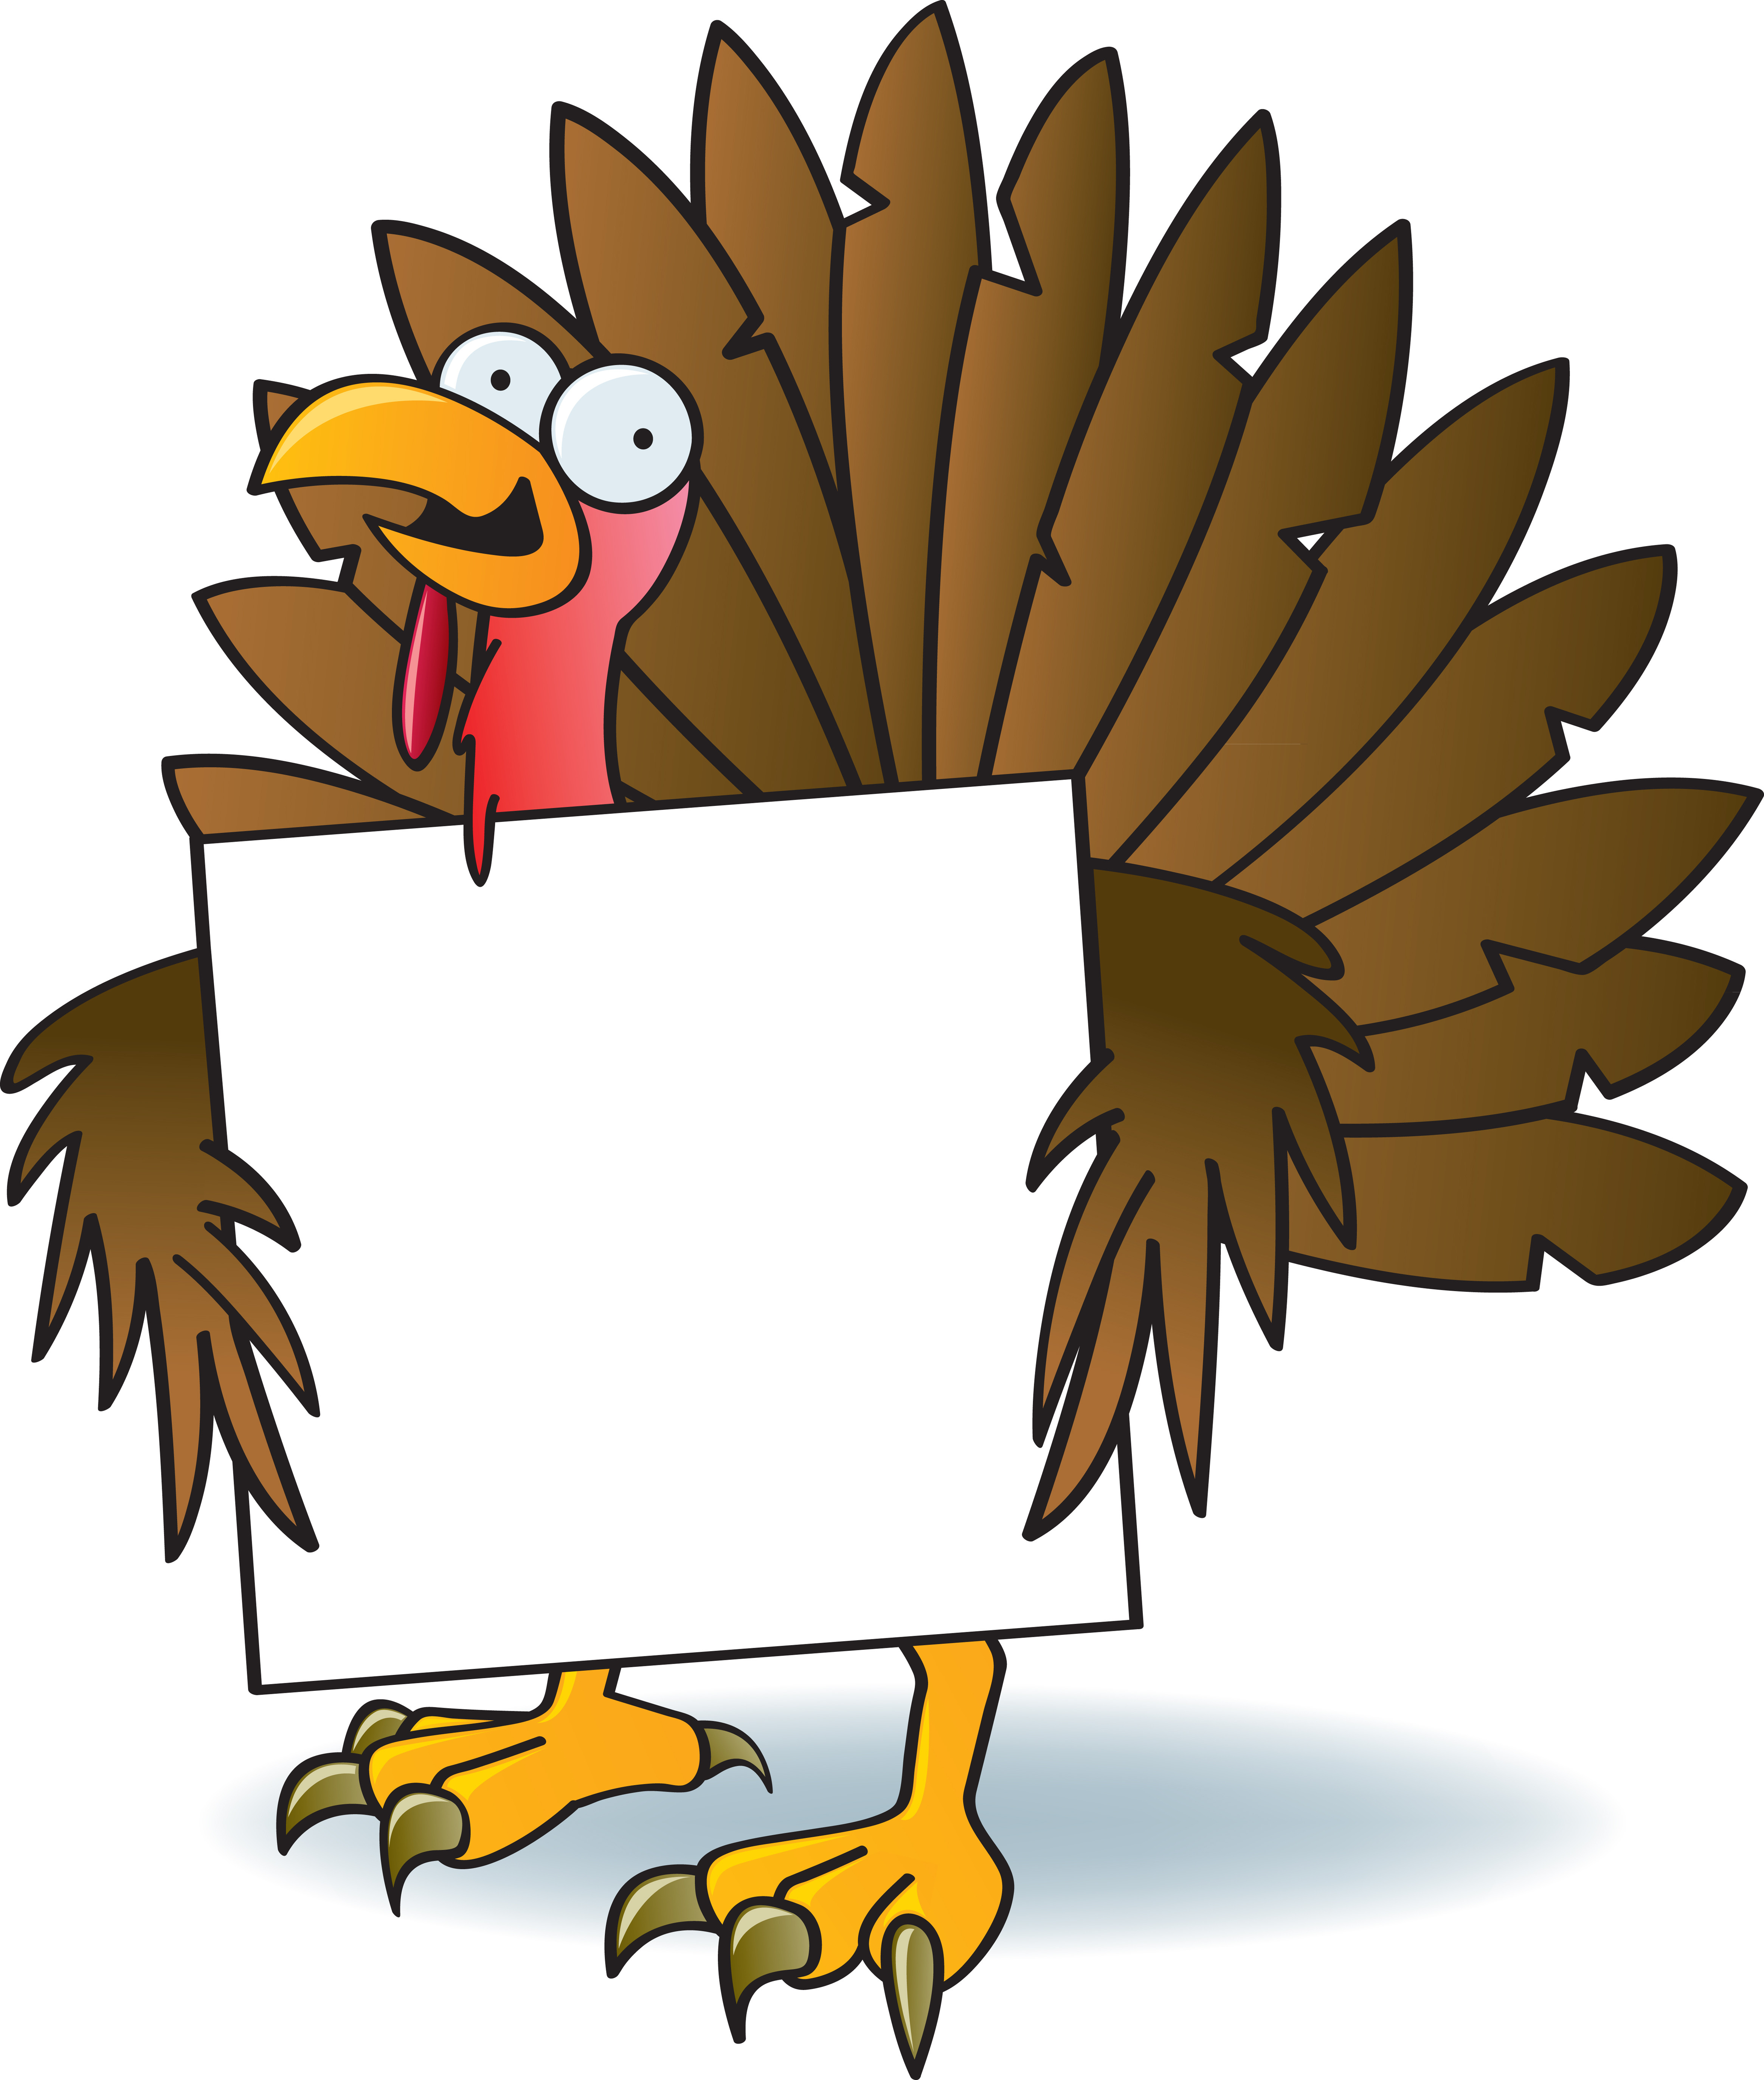 The Best Ideas for Thanksgiving Turkey Cartoon Images - Best Recipes Ever